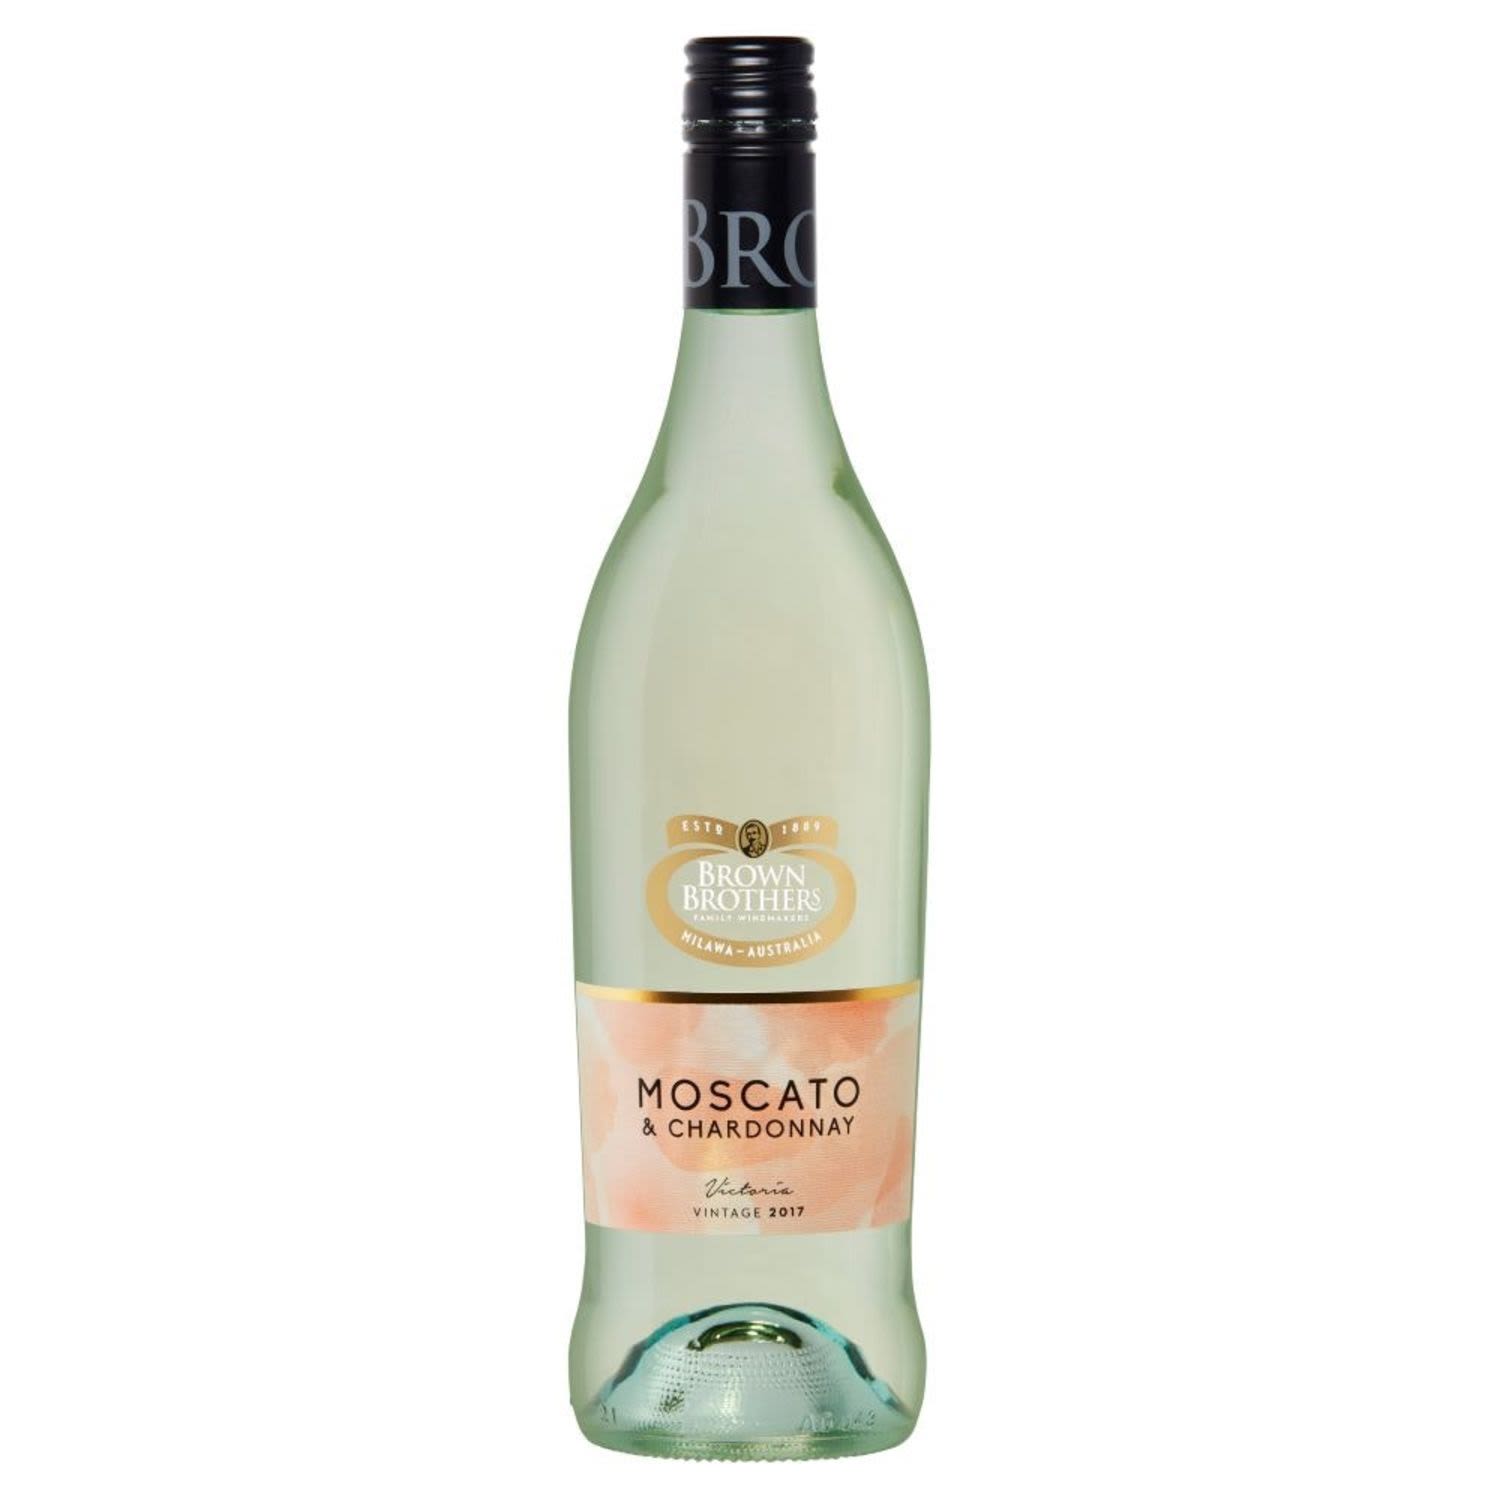 Exotic lychee, musk and fresh grape flavours combine perfectly with elegant stonefruit notes, creating an exciting twist. A touch drier than your usual Moscato this wine has a refreshing and vibrant spritz. Perfect to chill and enjoy.<br /> <br />Alcohol Volume: 7.10%<br /><br />Pack Format: Bottle<br /><br />Standard Drinks: 4.1</br /><br />Pack Type: Bottle<br /><br />Country of Origin: Australia<br /><br />Region: South Eastern Australia<br /><br />Vintage: Vintages Vary<br />